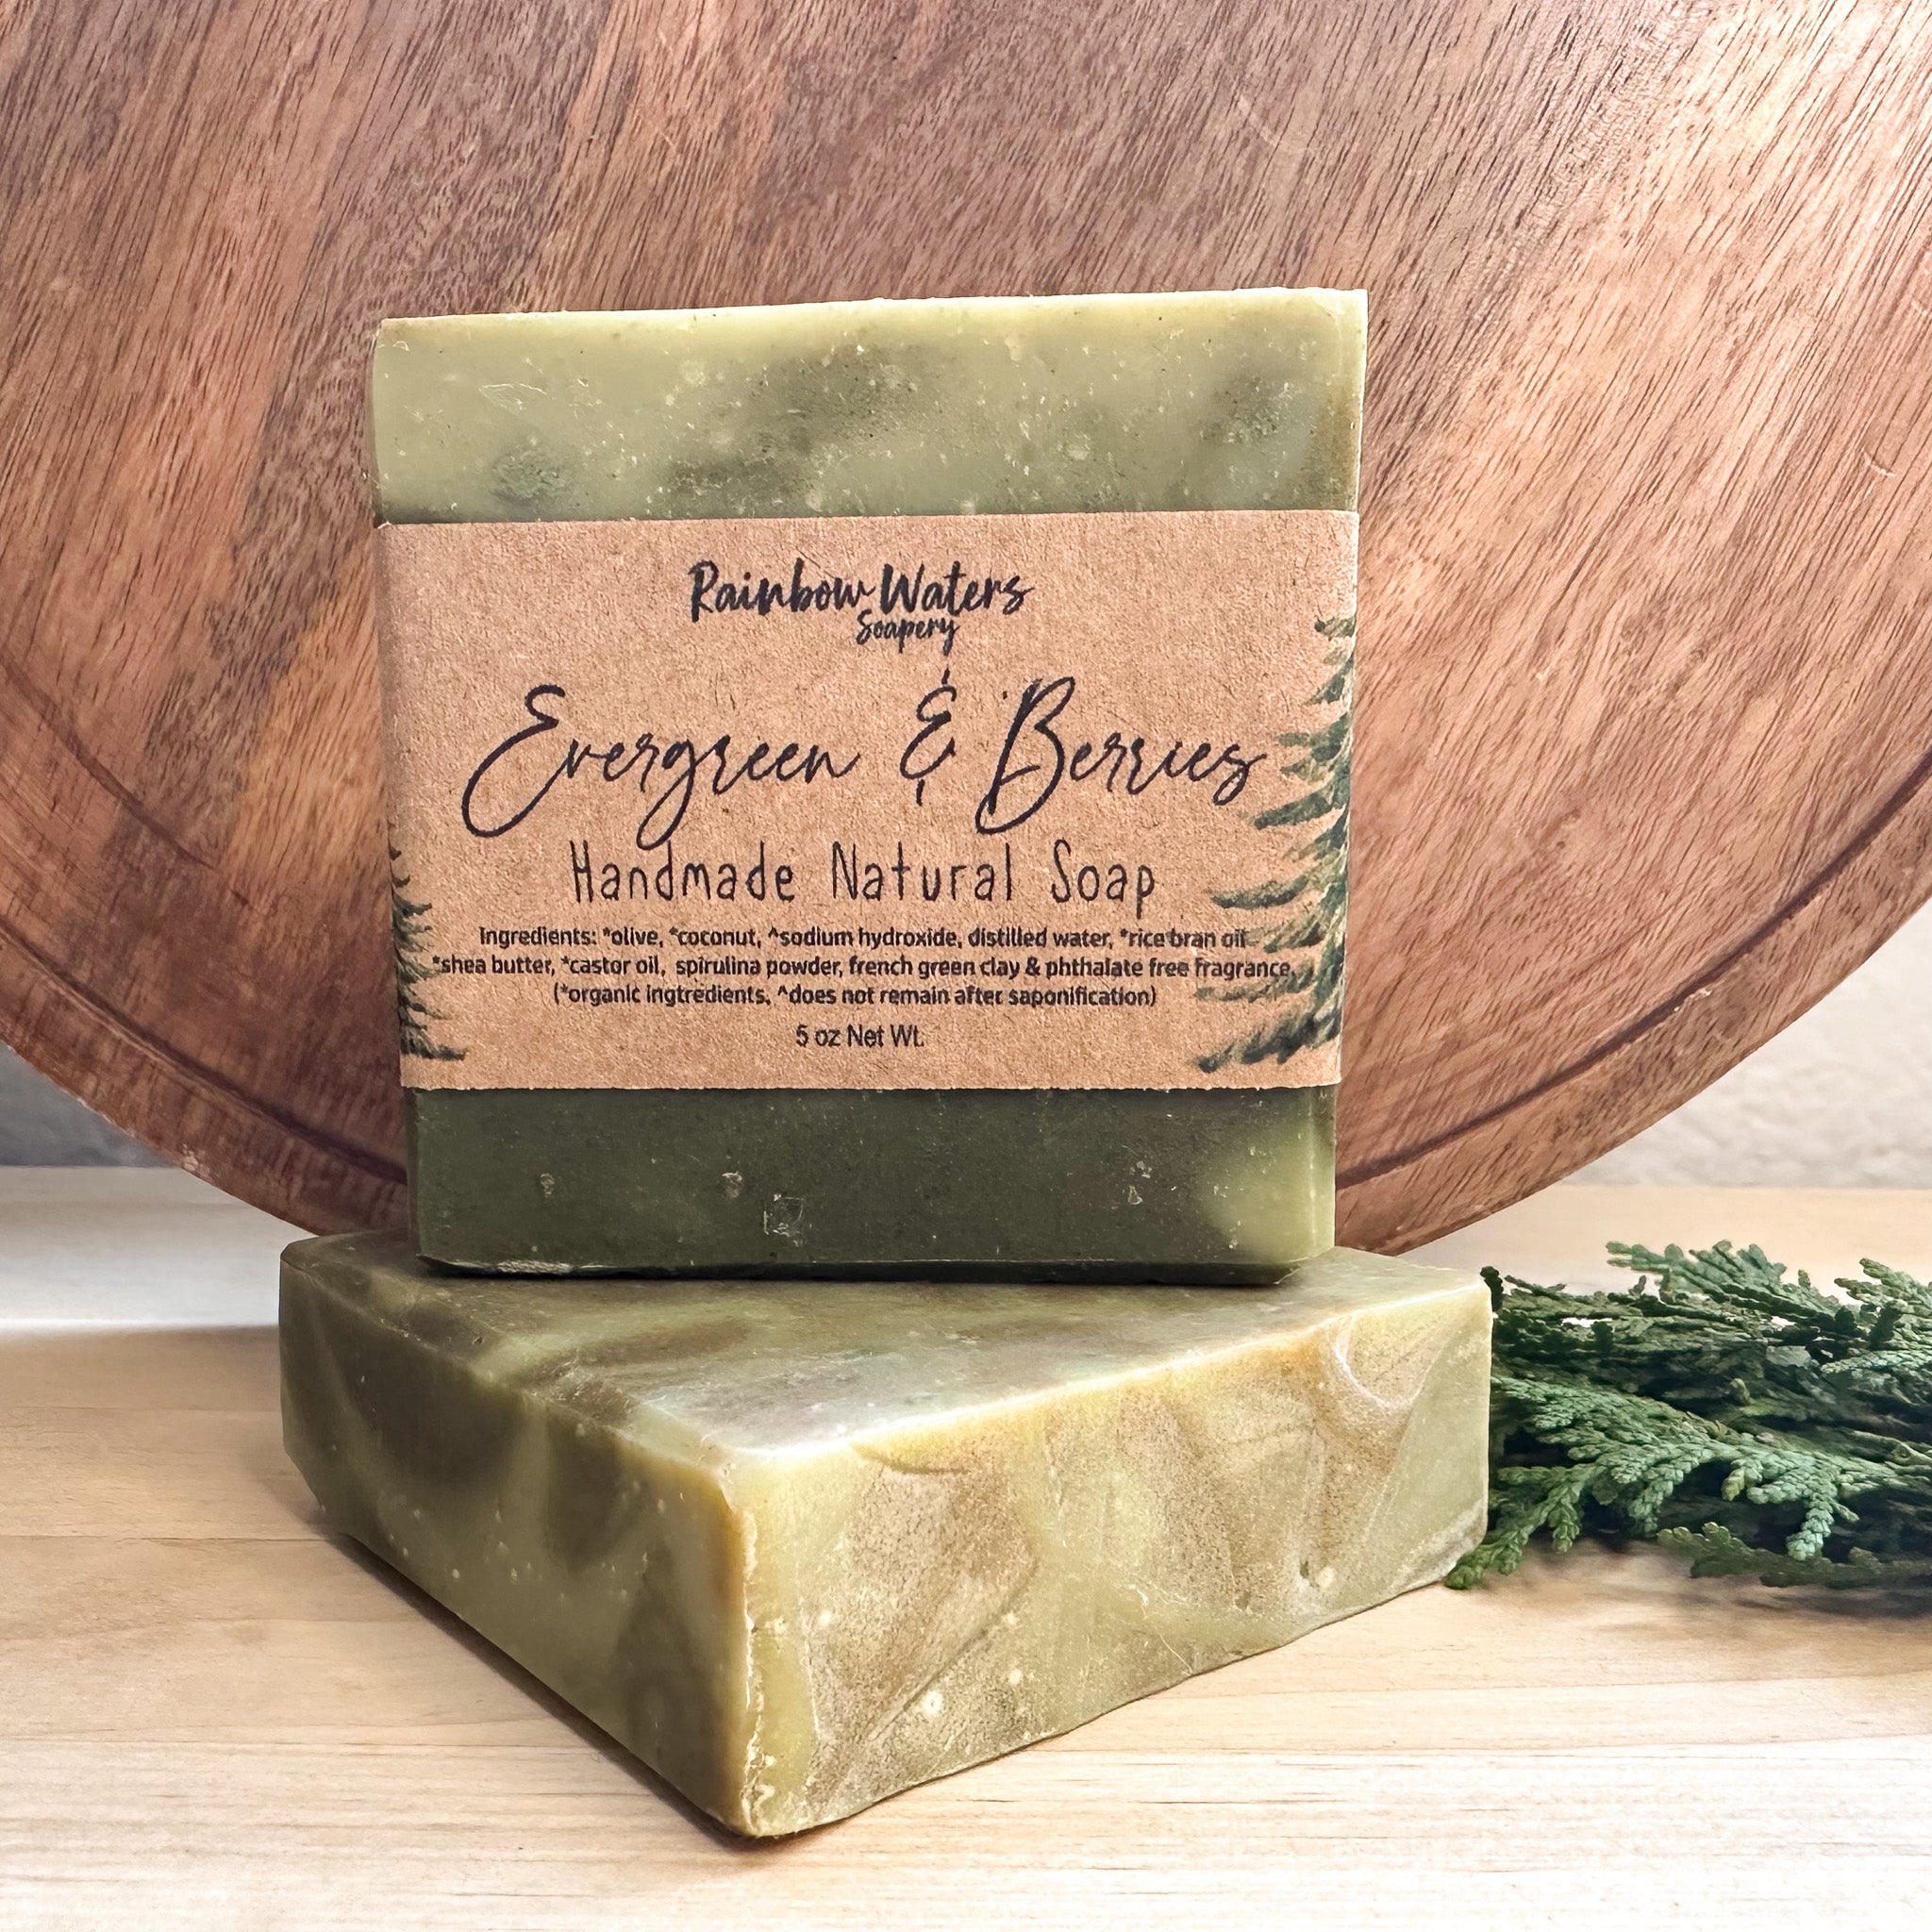 Evergreen & Berries, Handcrafted Hand & Body Soap Bar